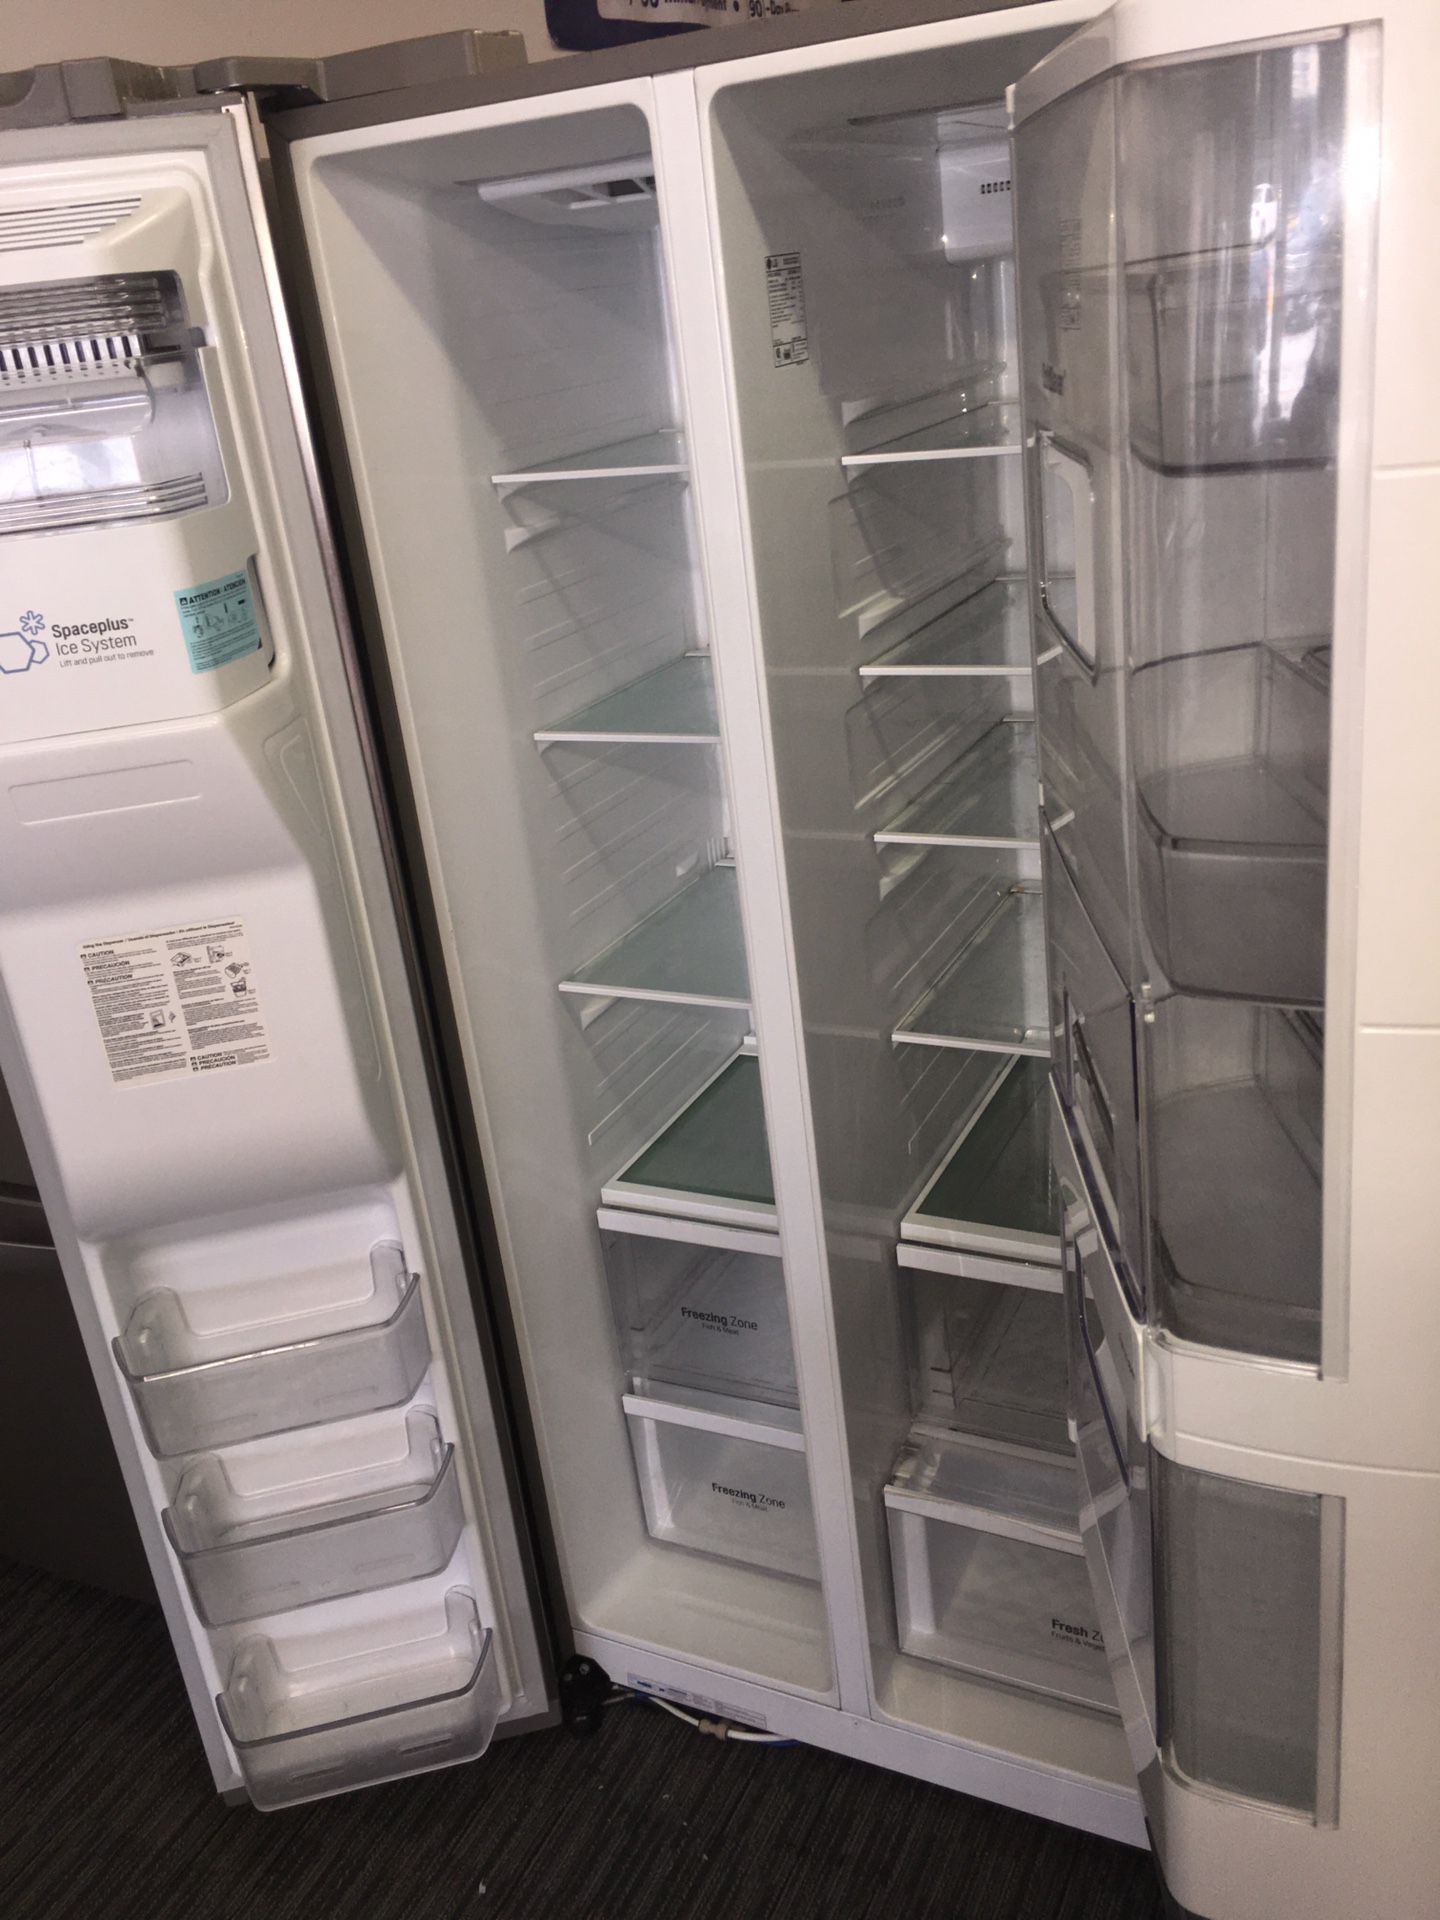 LG Side by Side Refrigerator Scraches Dent With Warranty No Credit Needed Just $79 The Down Payment Cash Price $899